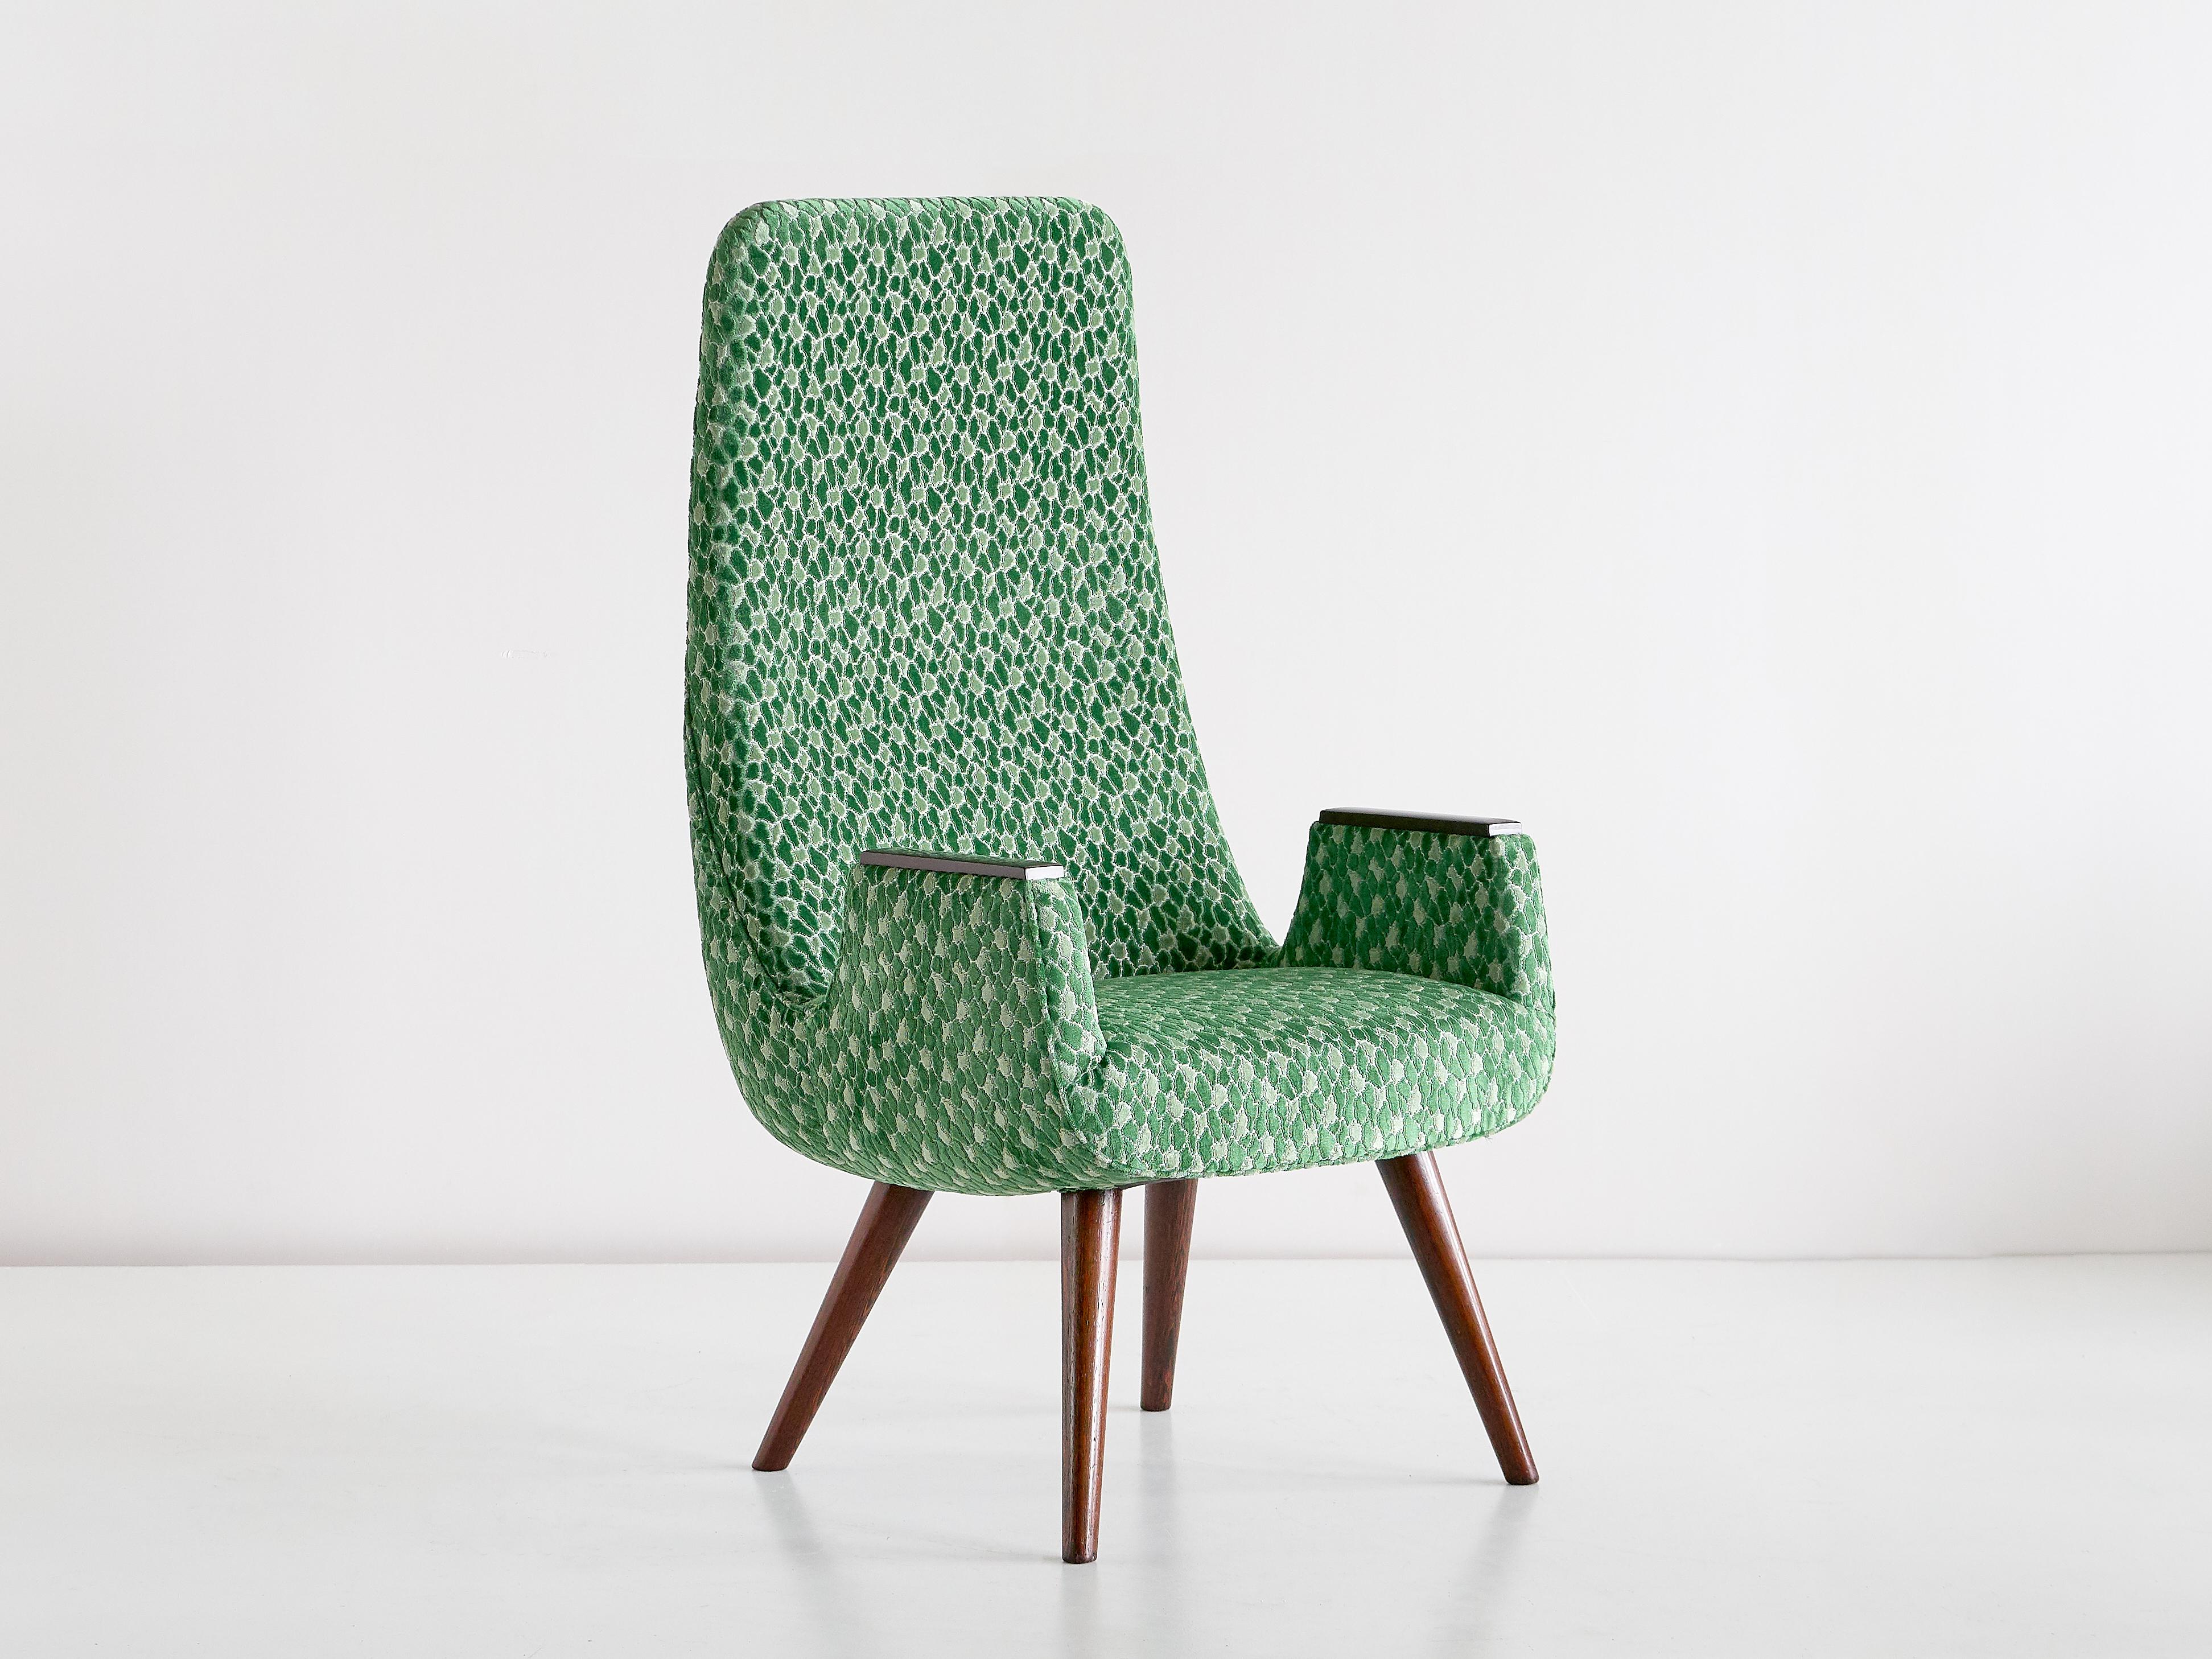 Dutch Pair of High Back Armchairs in Green Braquenié Velvet and Wengé Wood, 1950s For Sale